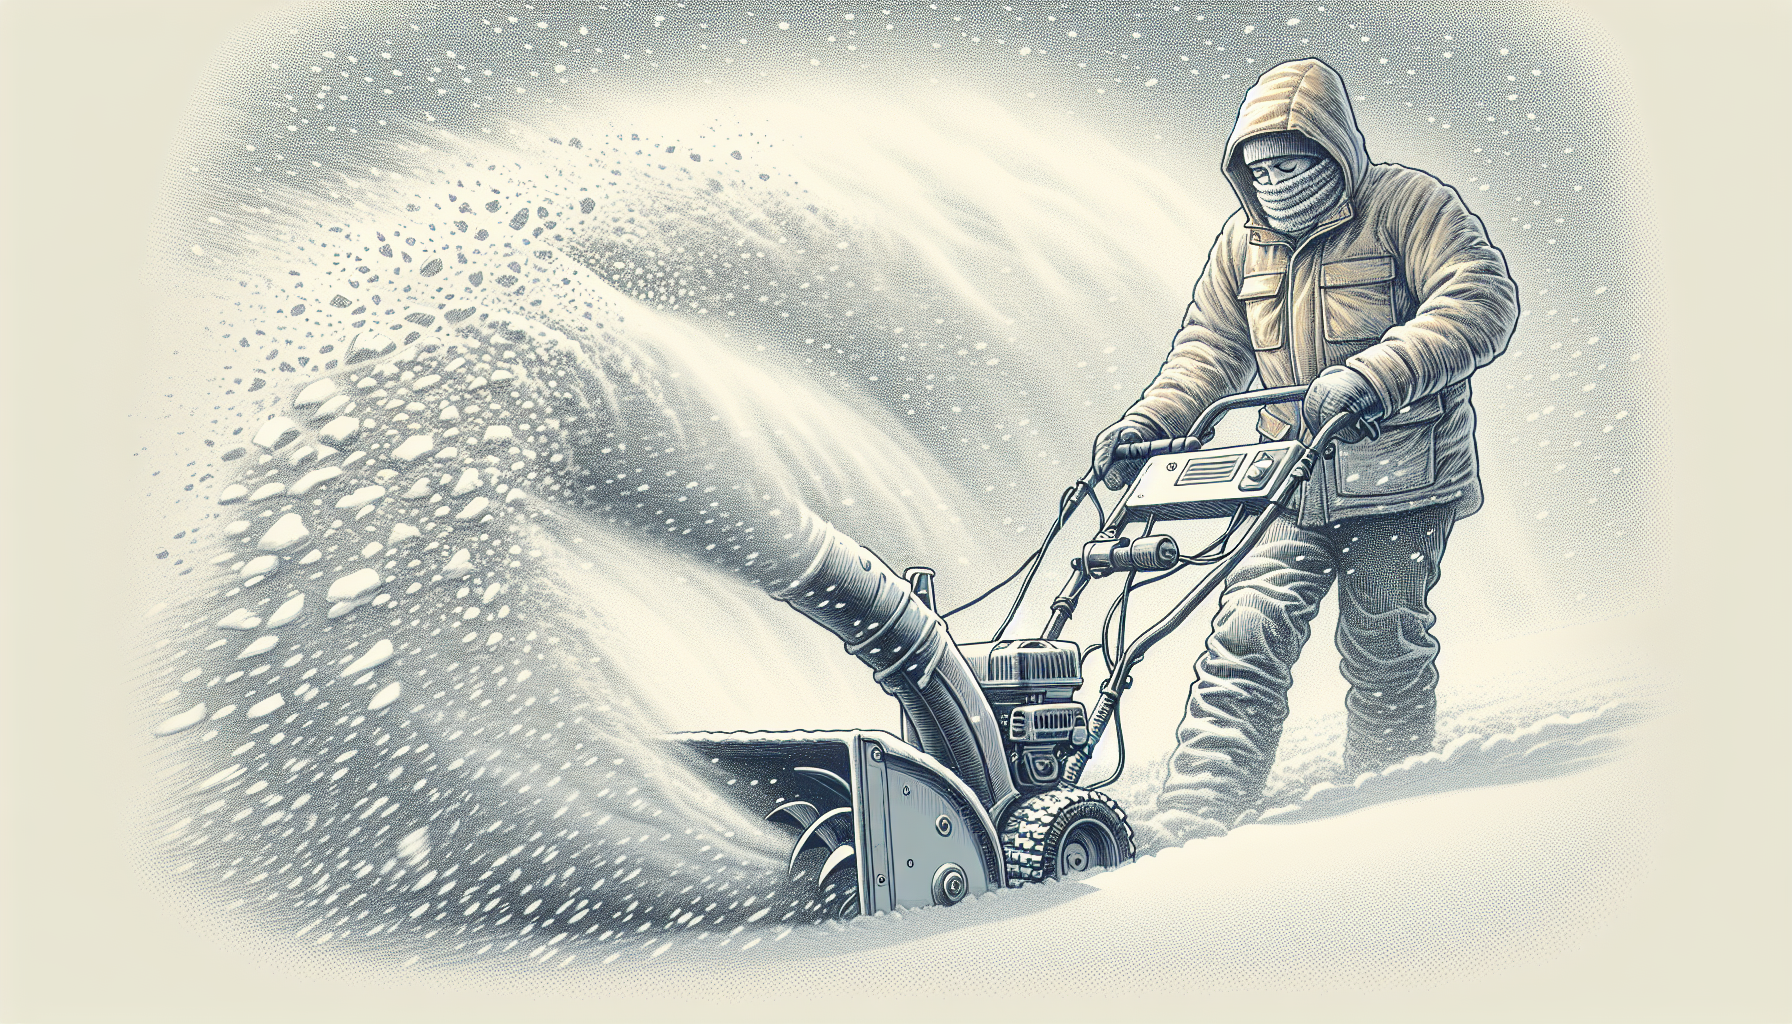 Can An Electric Snow Blower Handle Heavy Snow?